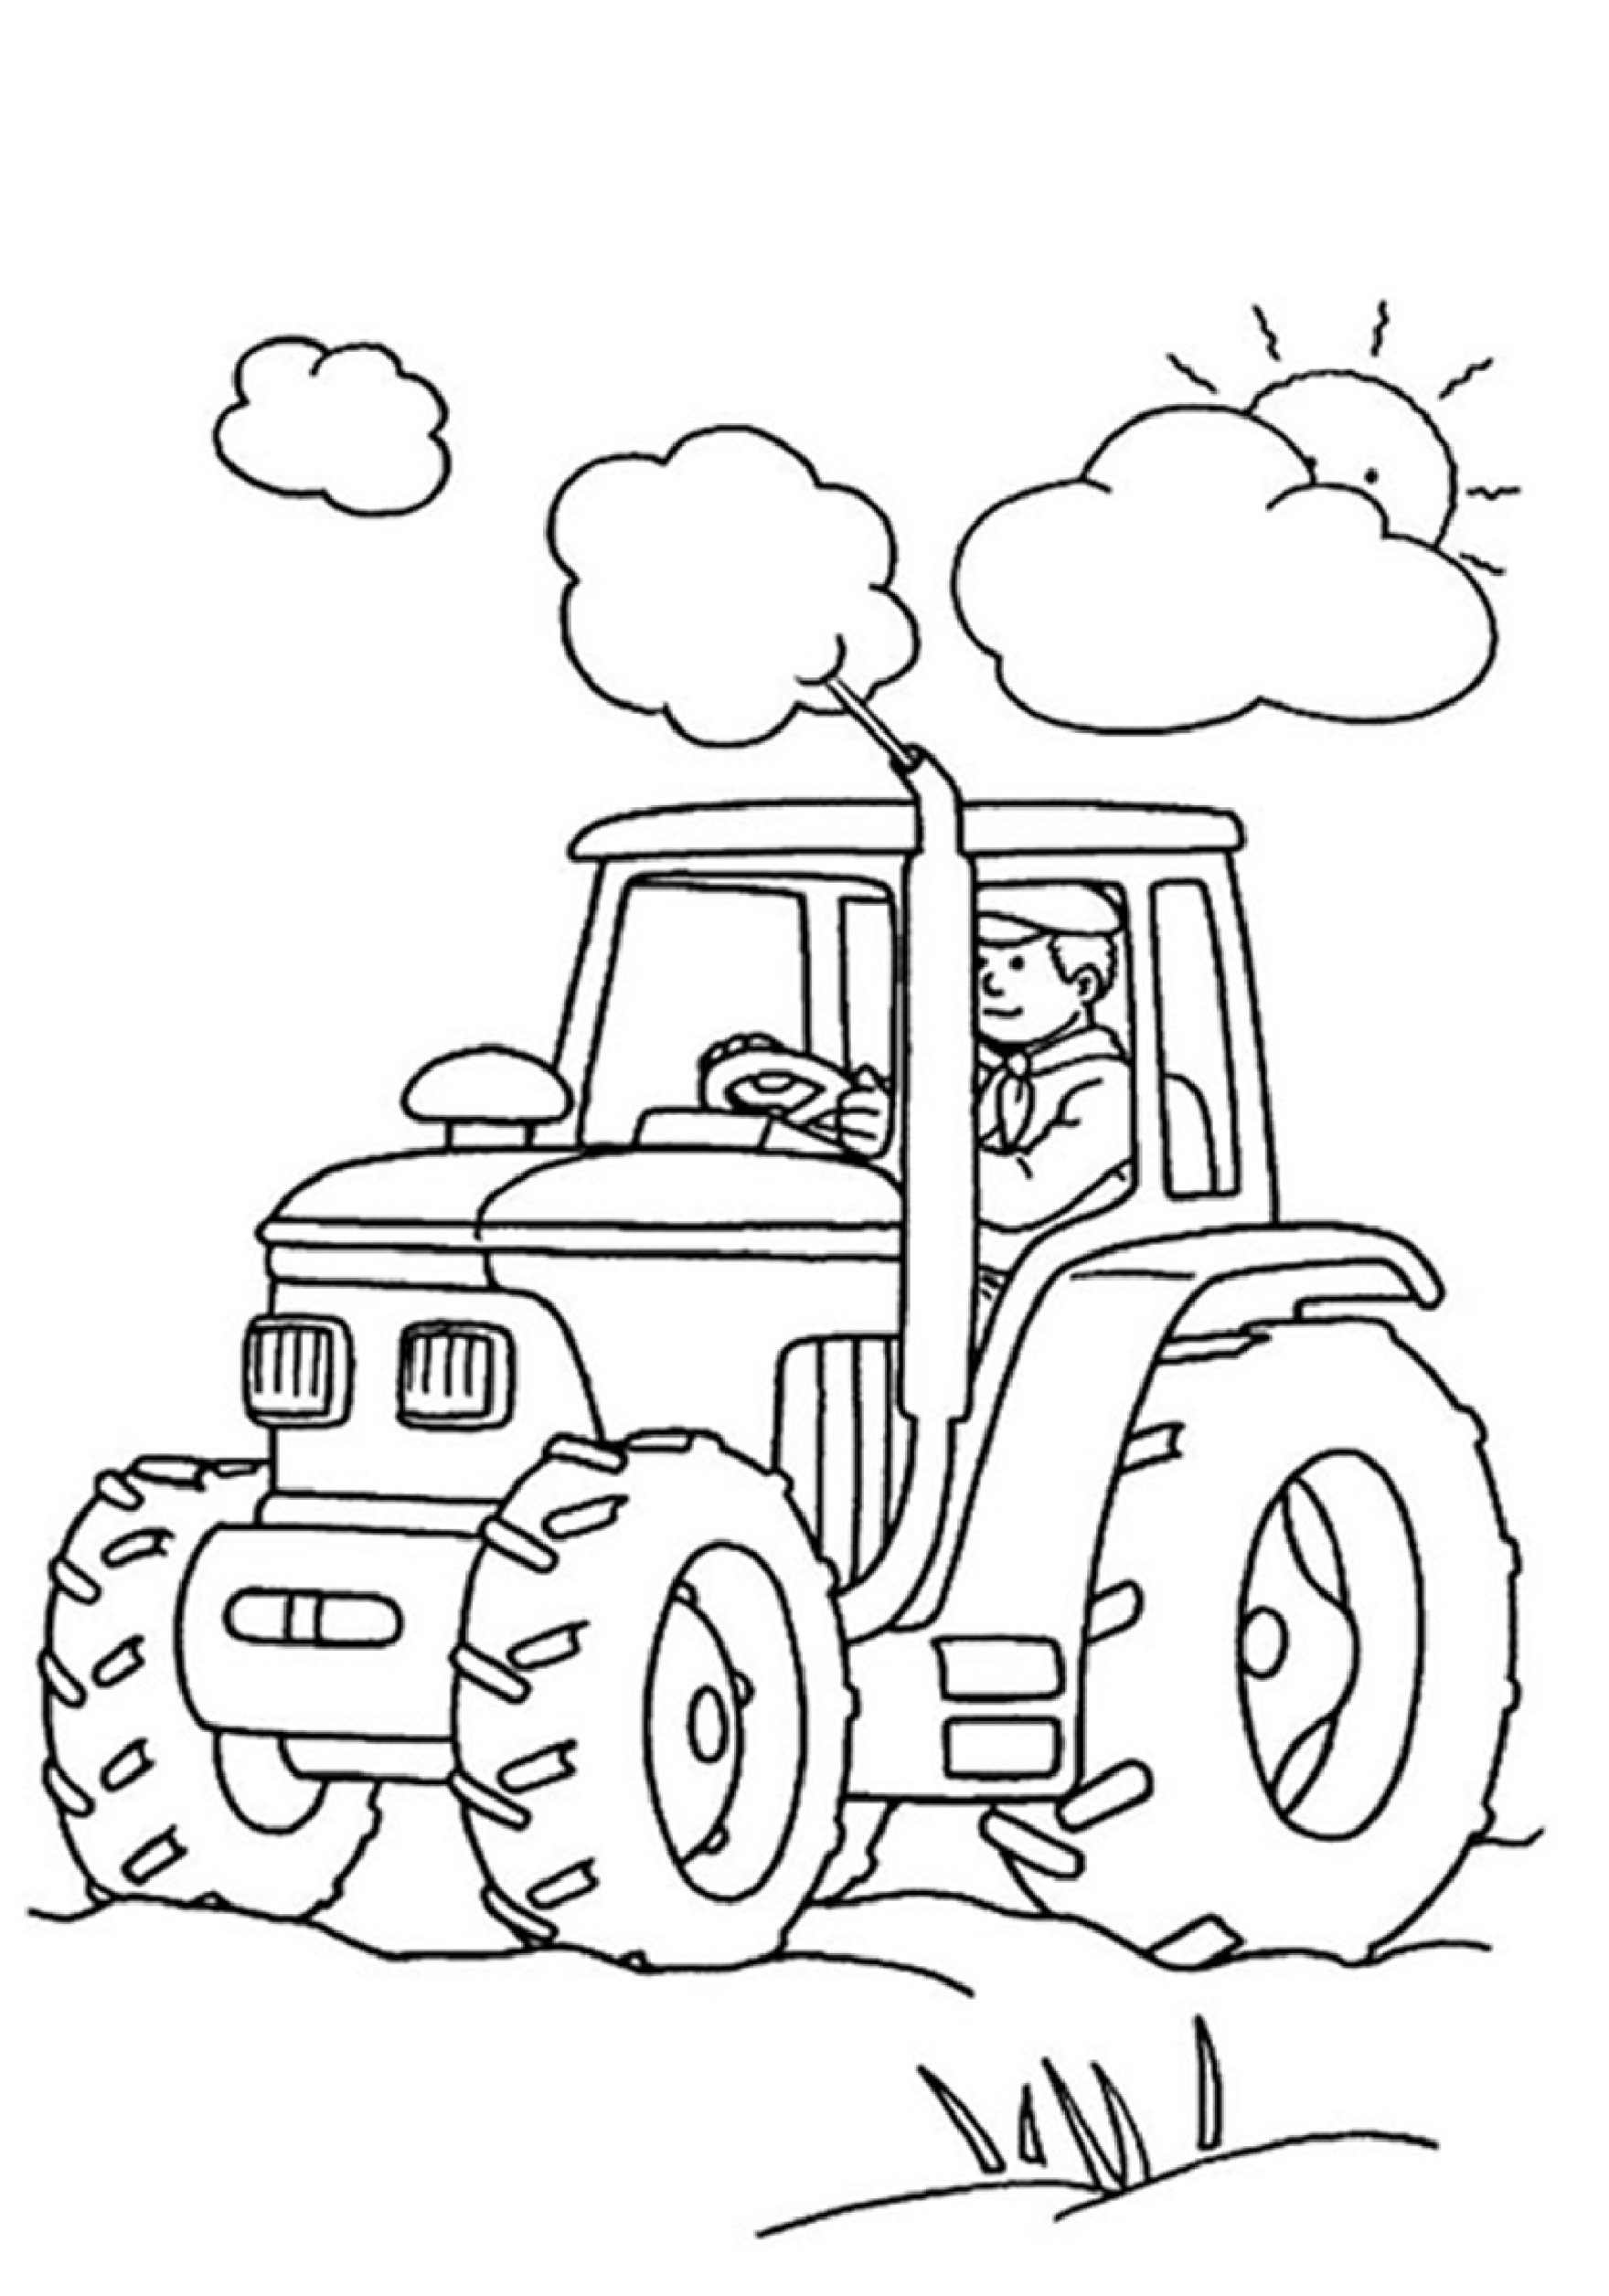 Home Coloring Pages For Boys
 Boy Coloring Pages Pdf Coloring Home